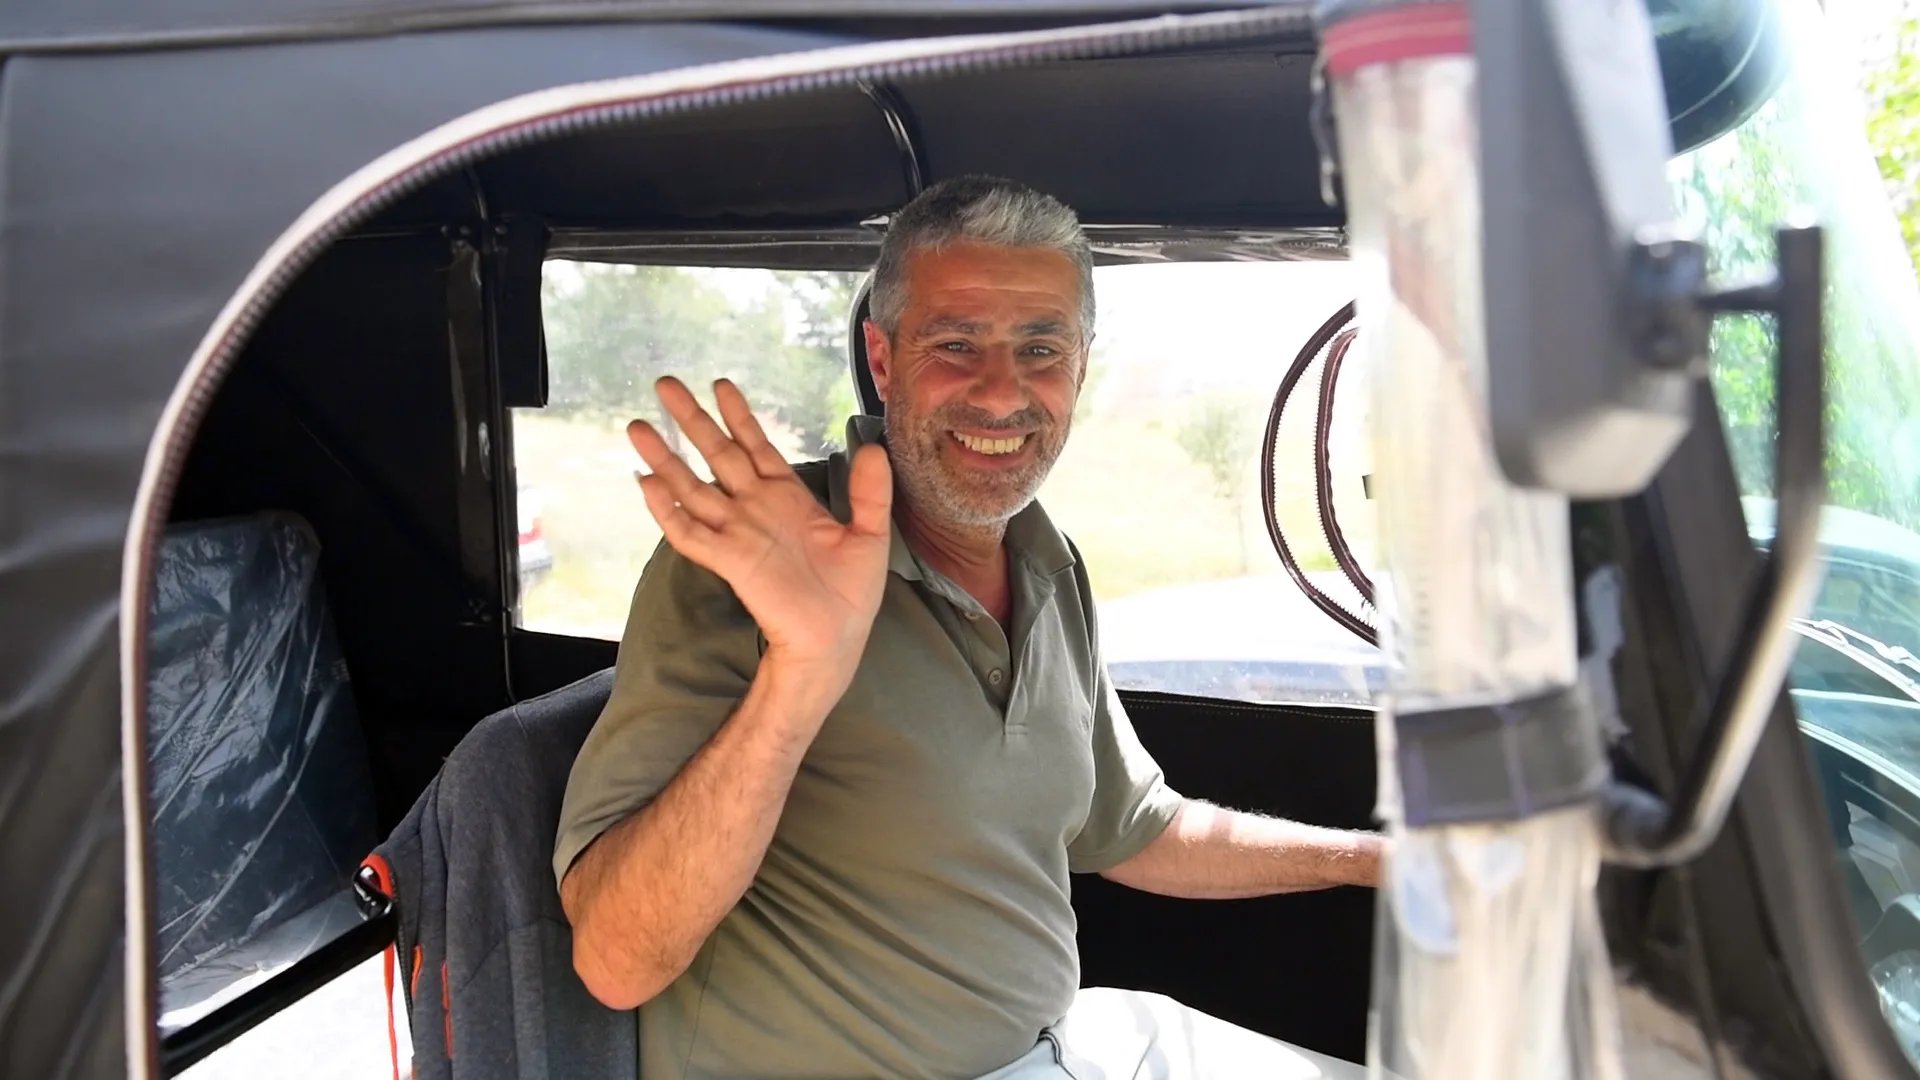 A man waving from behind the wheel of a small motorized vehicle